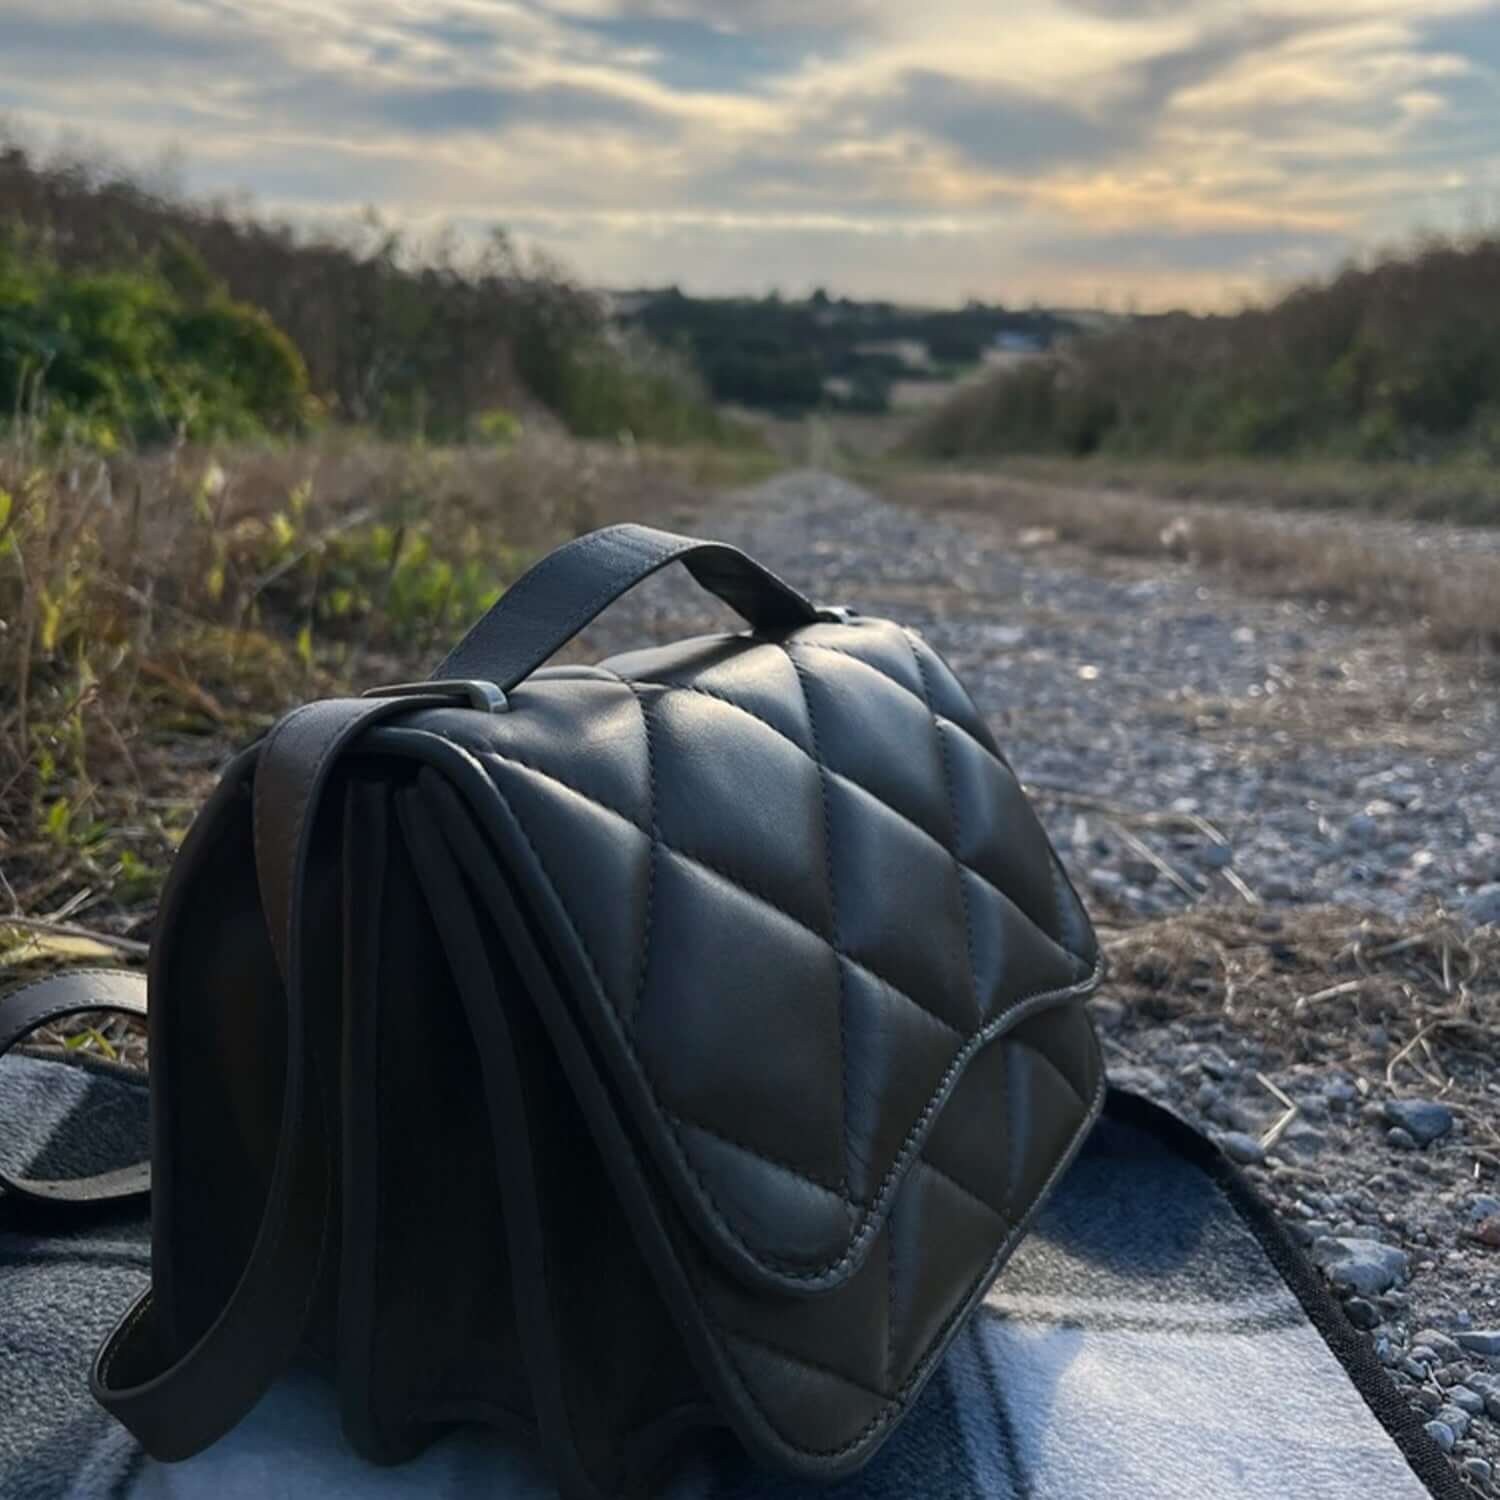 Diamond quilted puffy olive green shoulder bag in open space landscape. Landscape moods - picnic with a view.